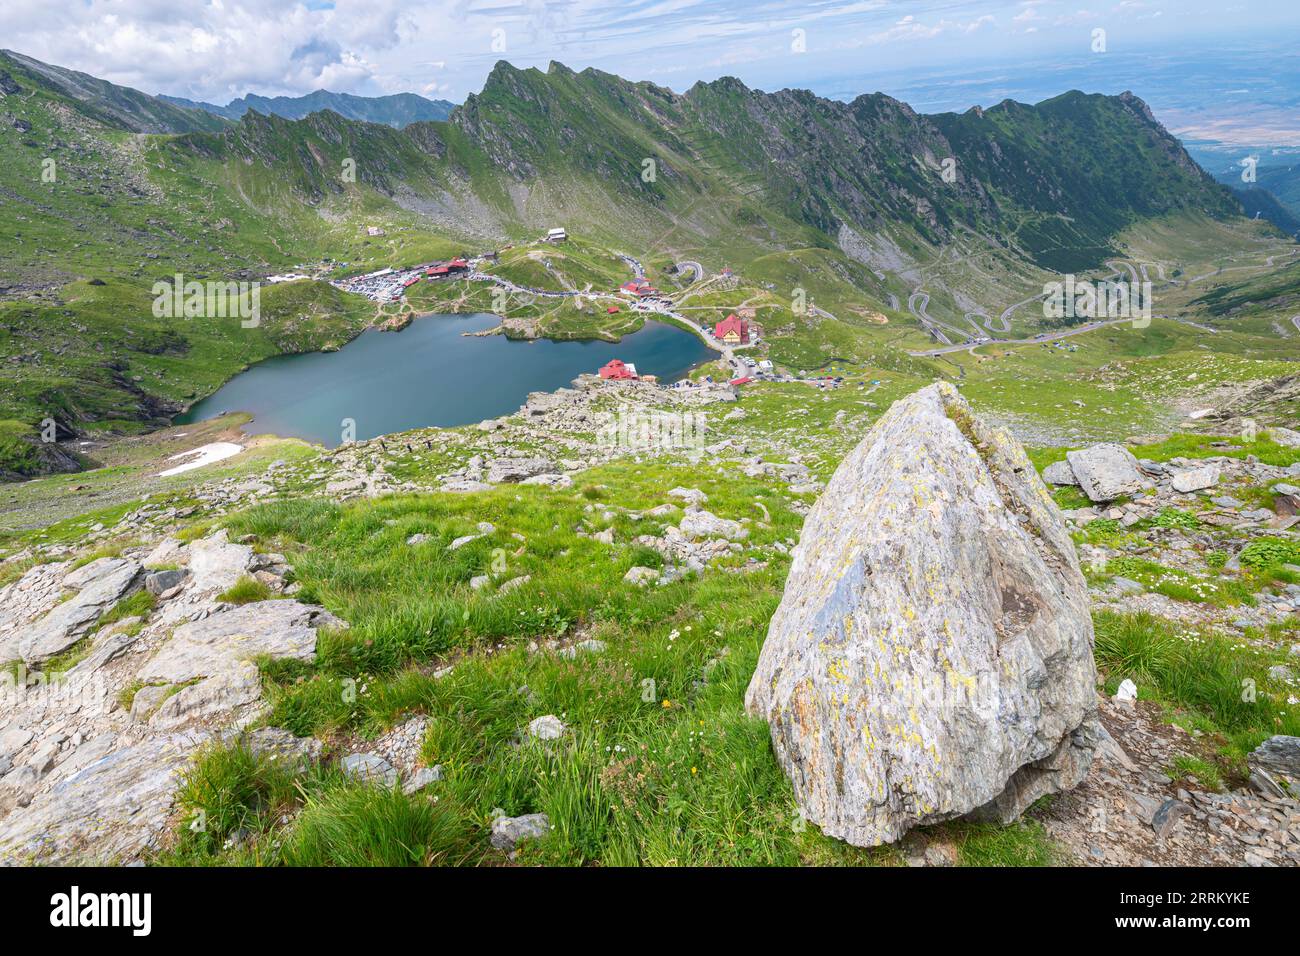 Picturesque view from above of Bâlea Lake in Făgăraș Mountains, Romania. Stock Photo